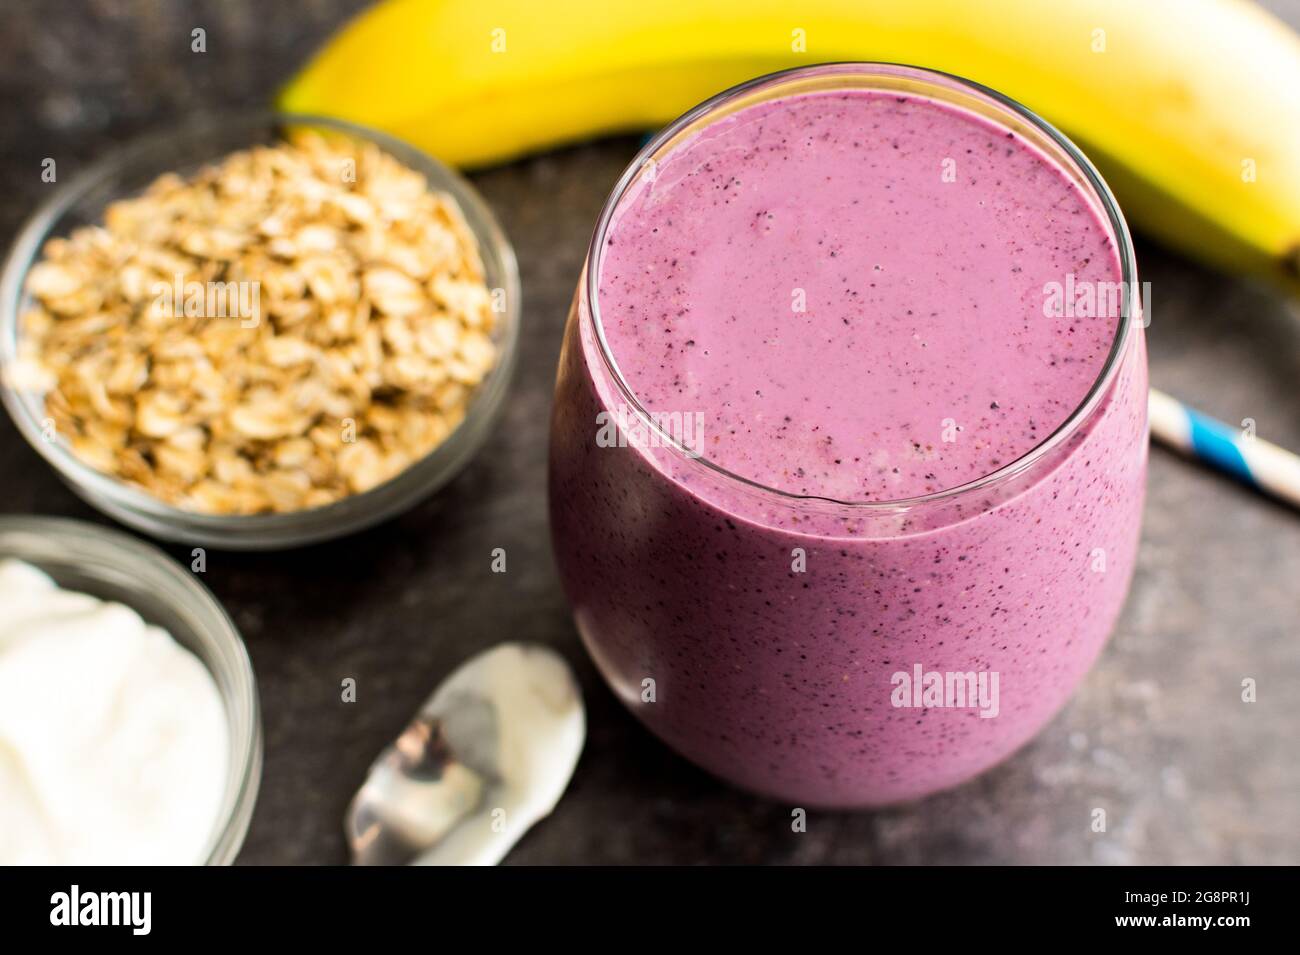 Healthy Blueberry Muffin Breakfast Smoothie: A smoothie made with blueberries, banana, rolled oats, and Greek yogurt Stock Photo